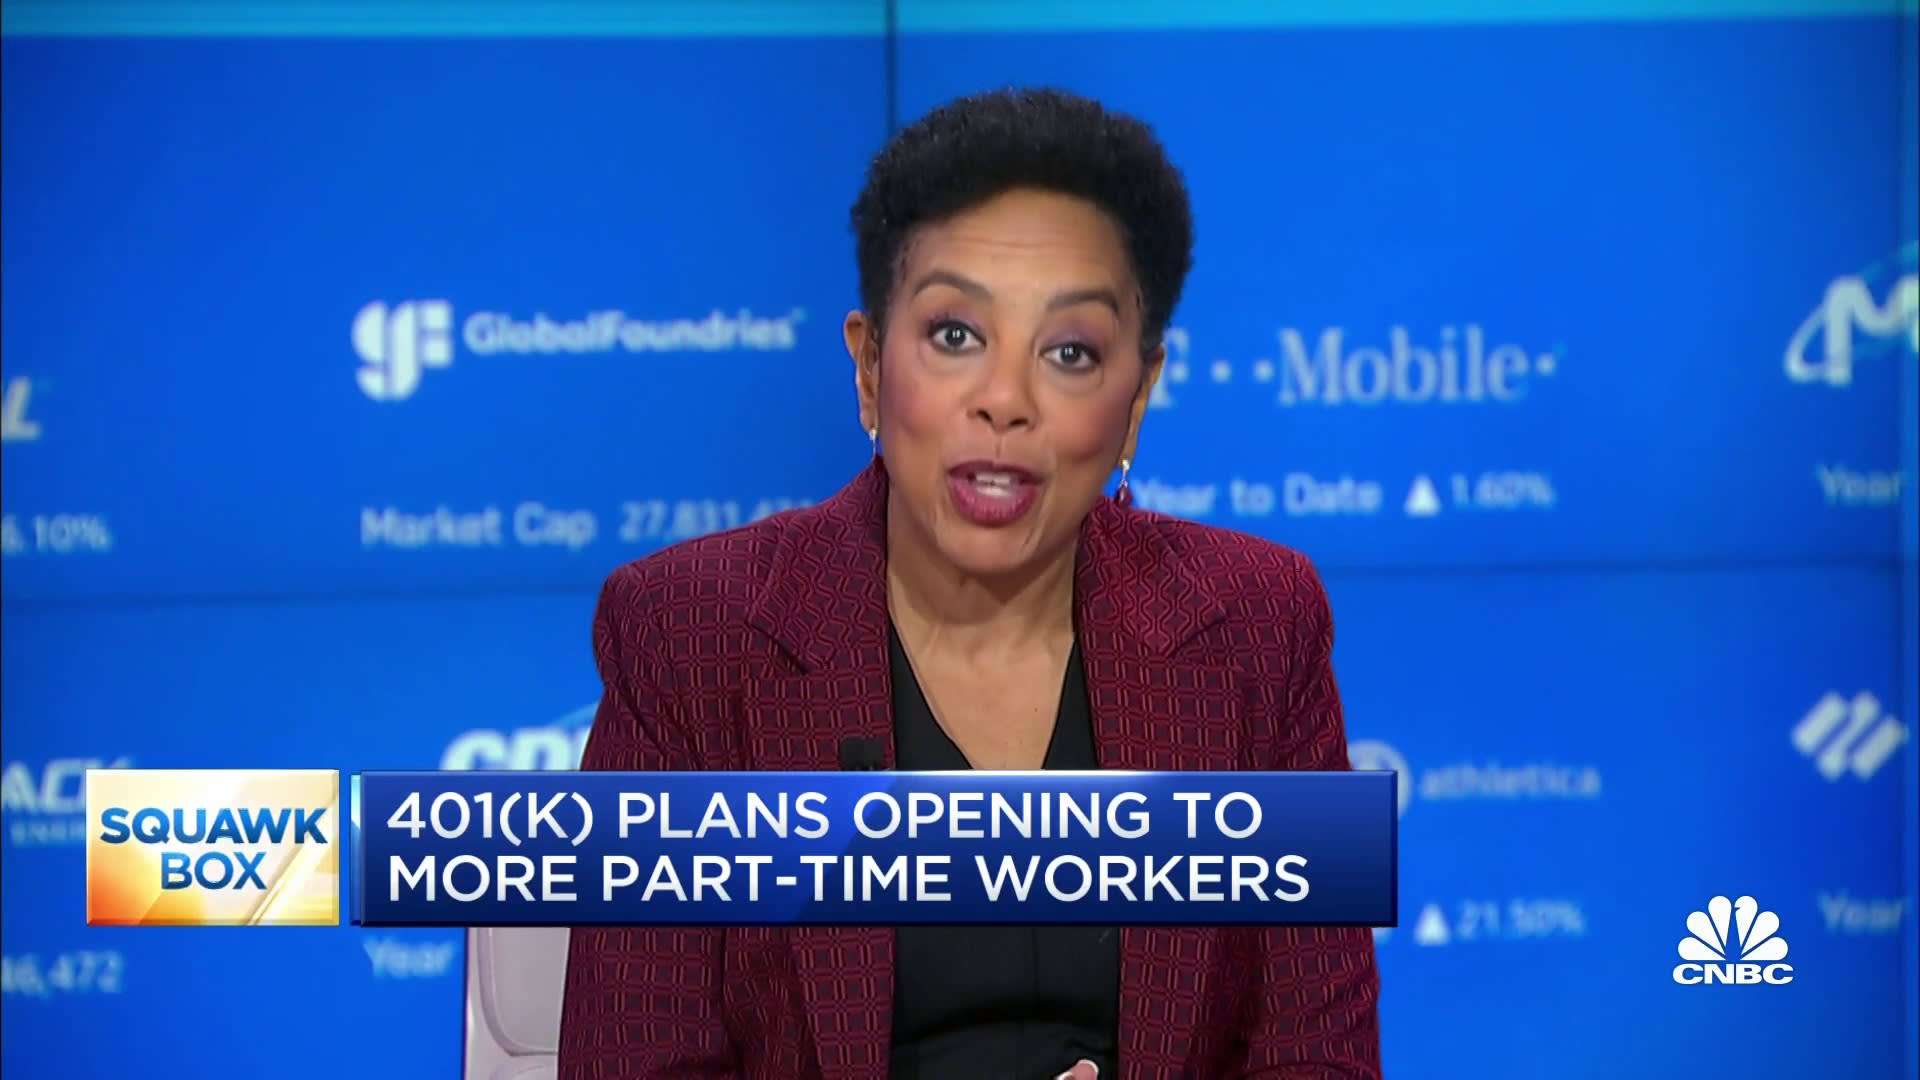 401(k) plans opening to more part-time workers